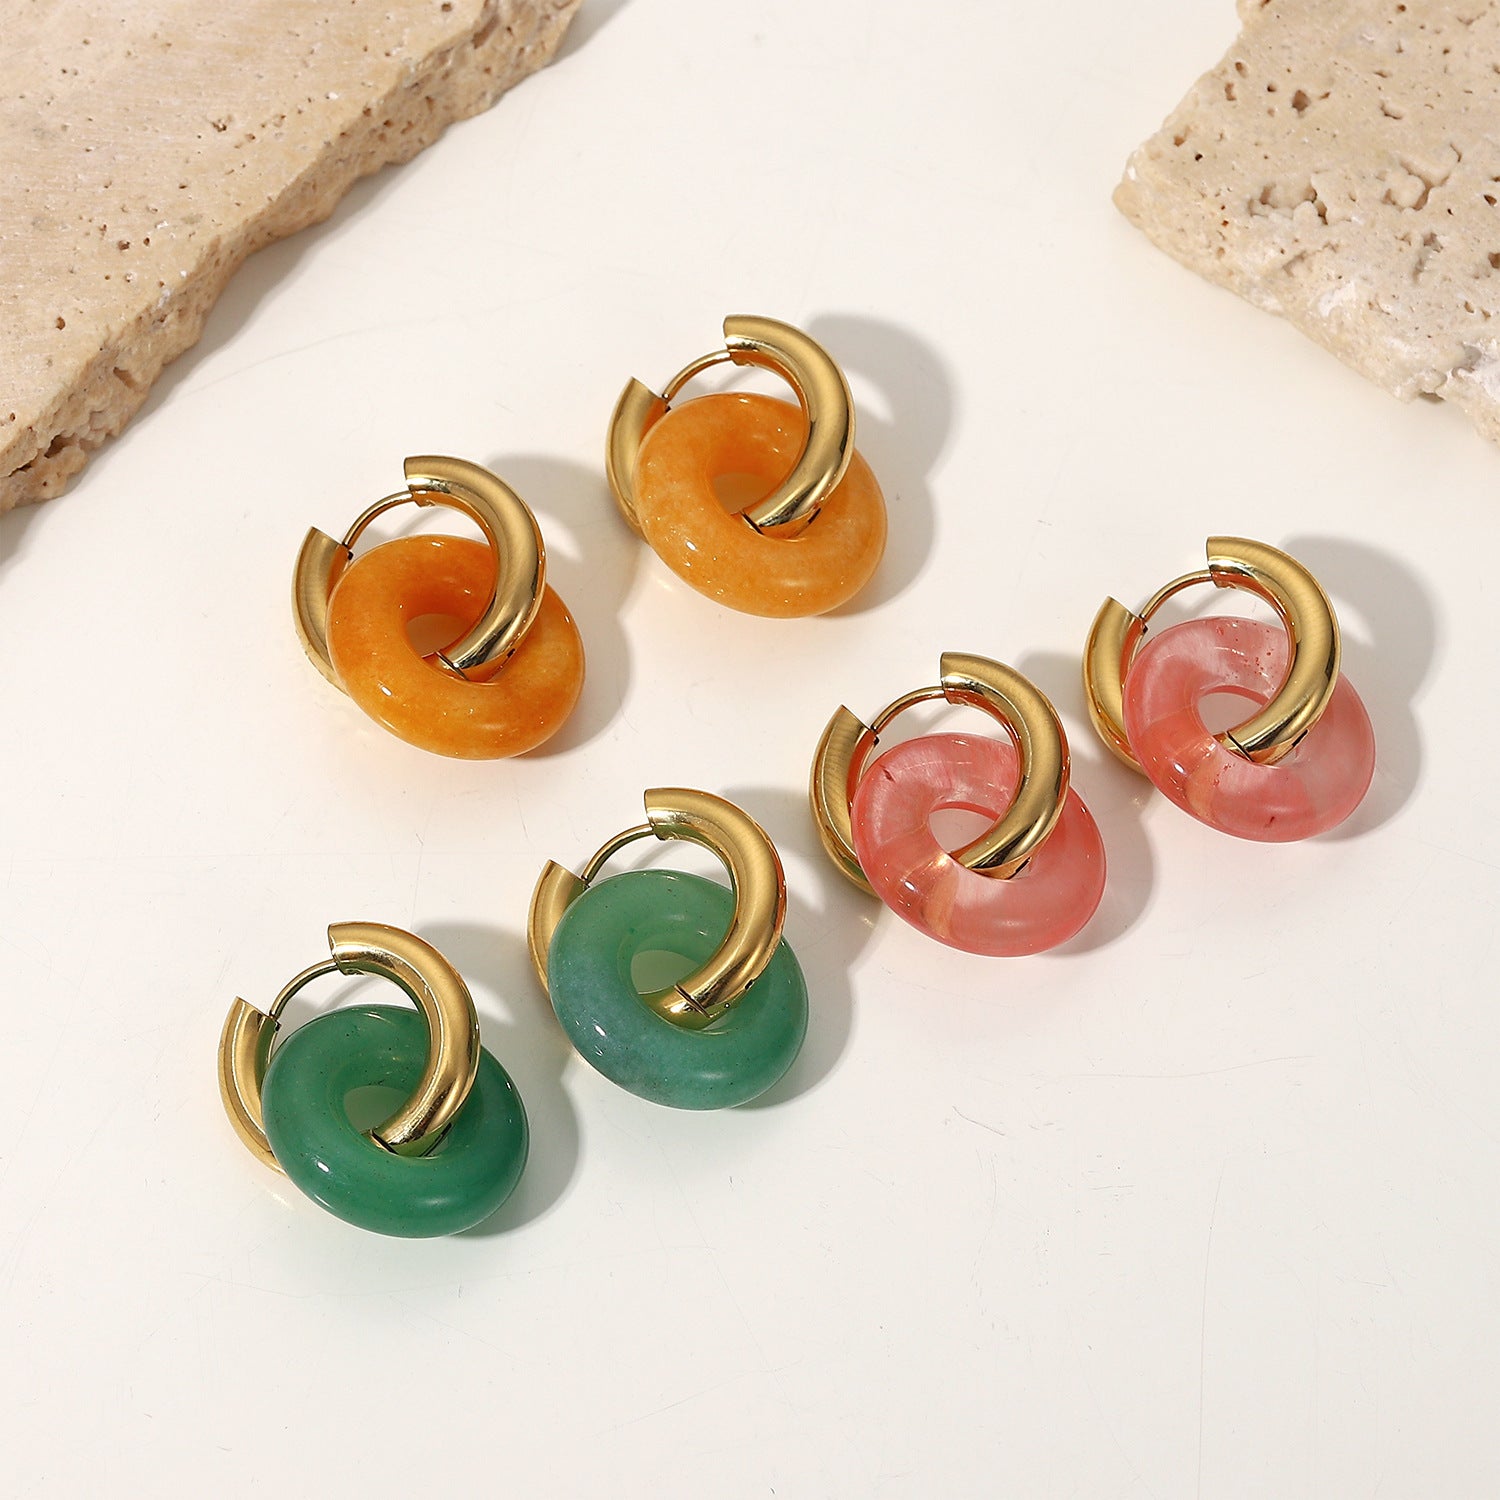 A set of Fashion Retro Natural Stone Ring Earrings For Women by Maramalive™ on a satin.